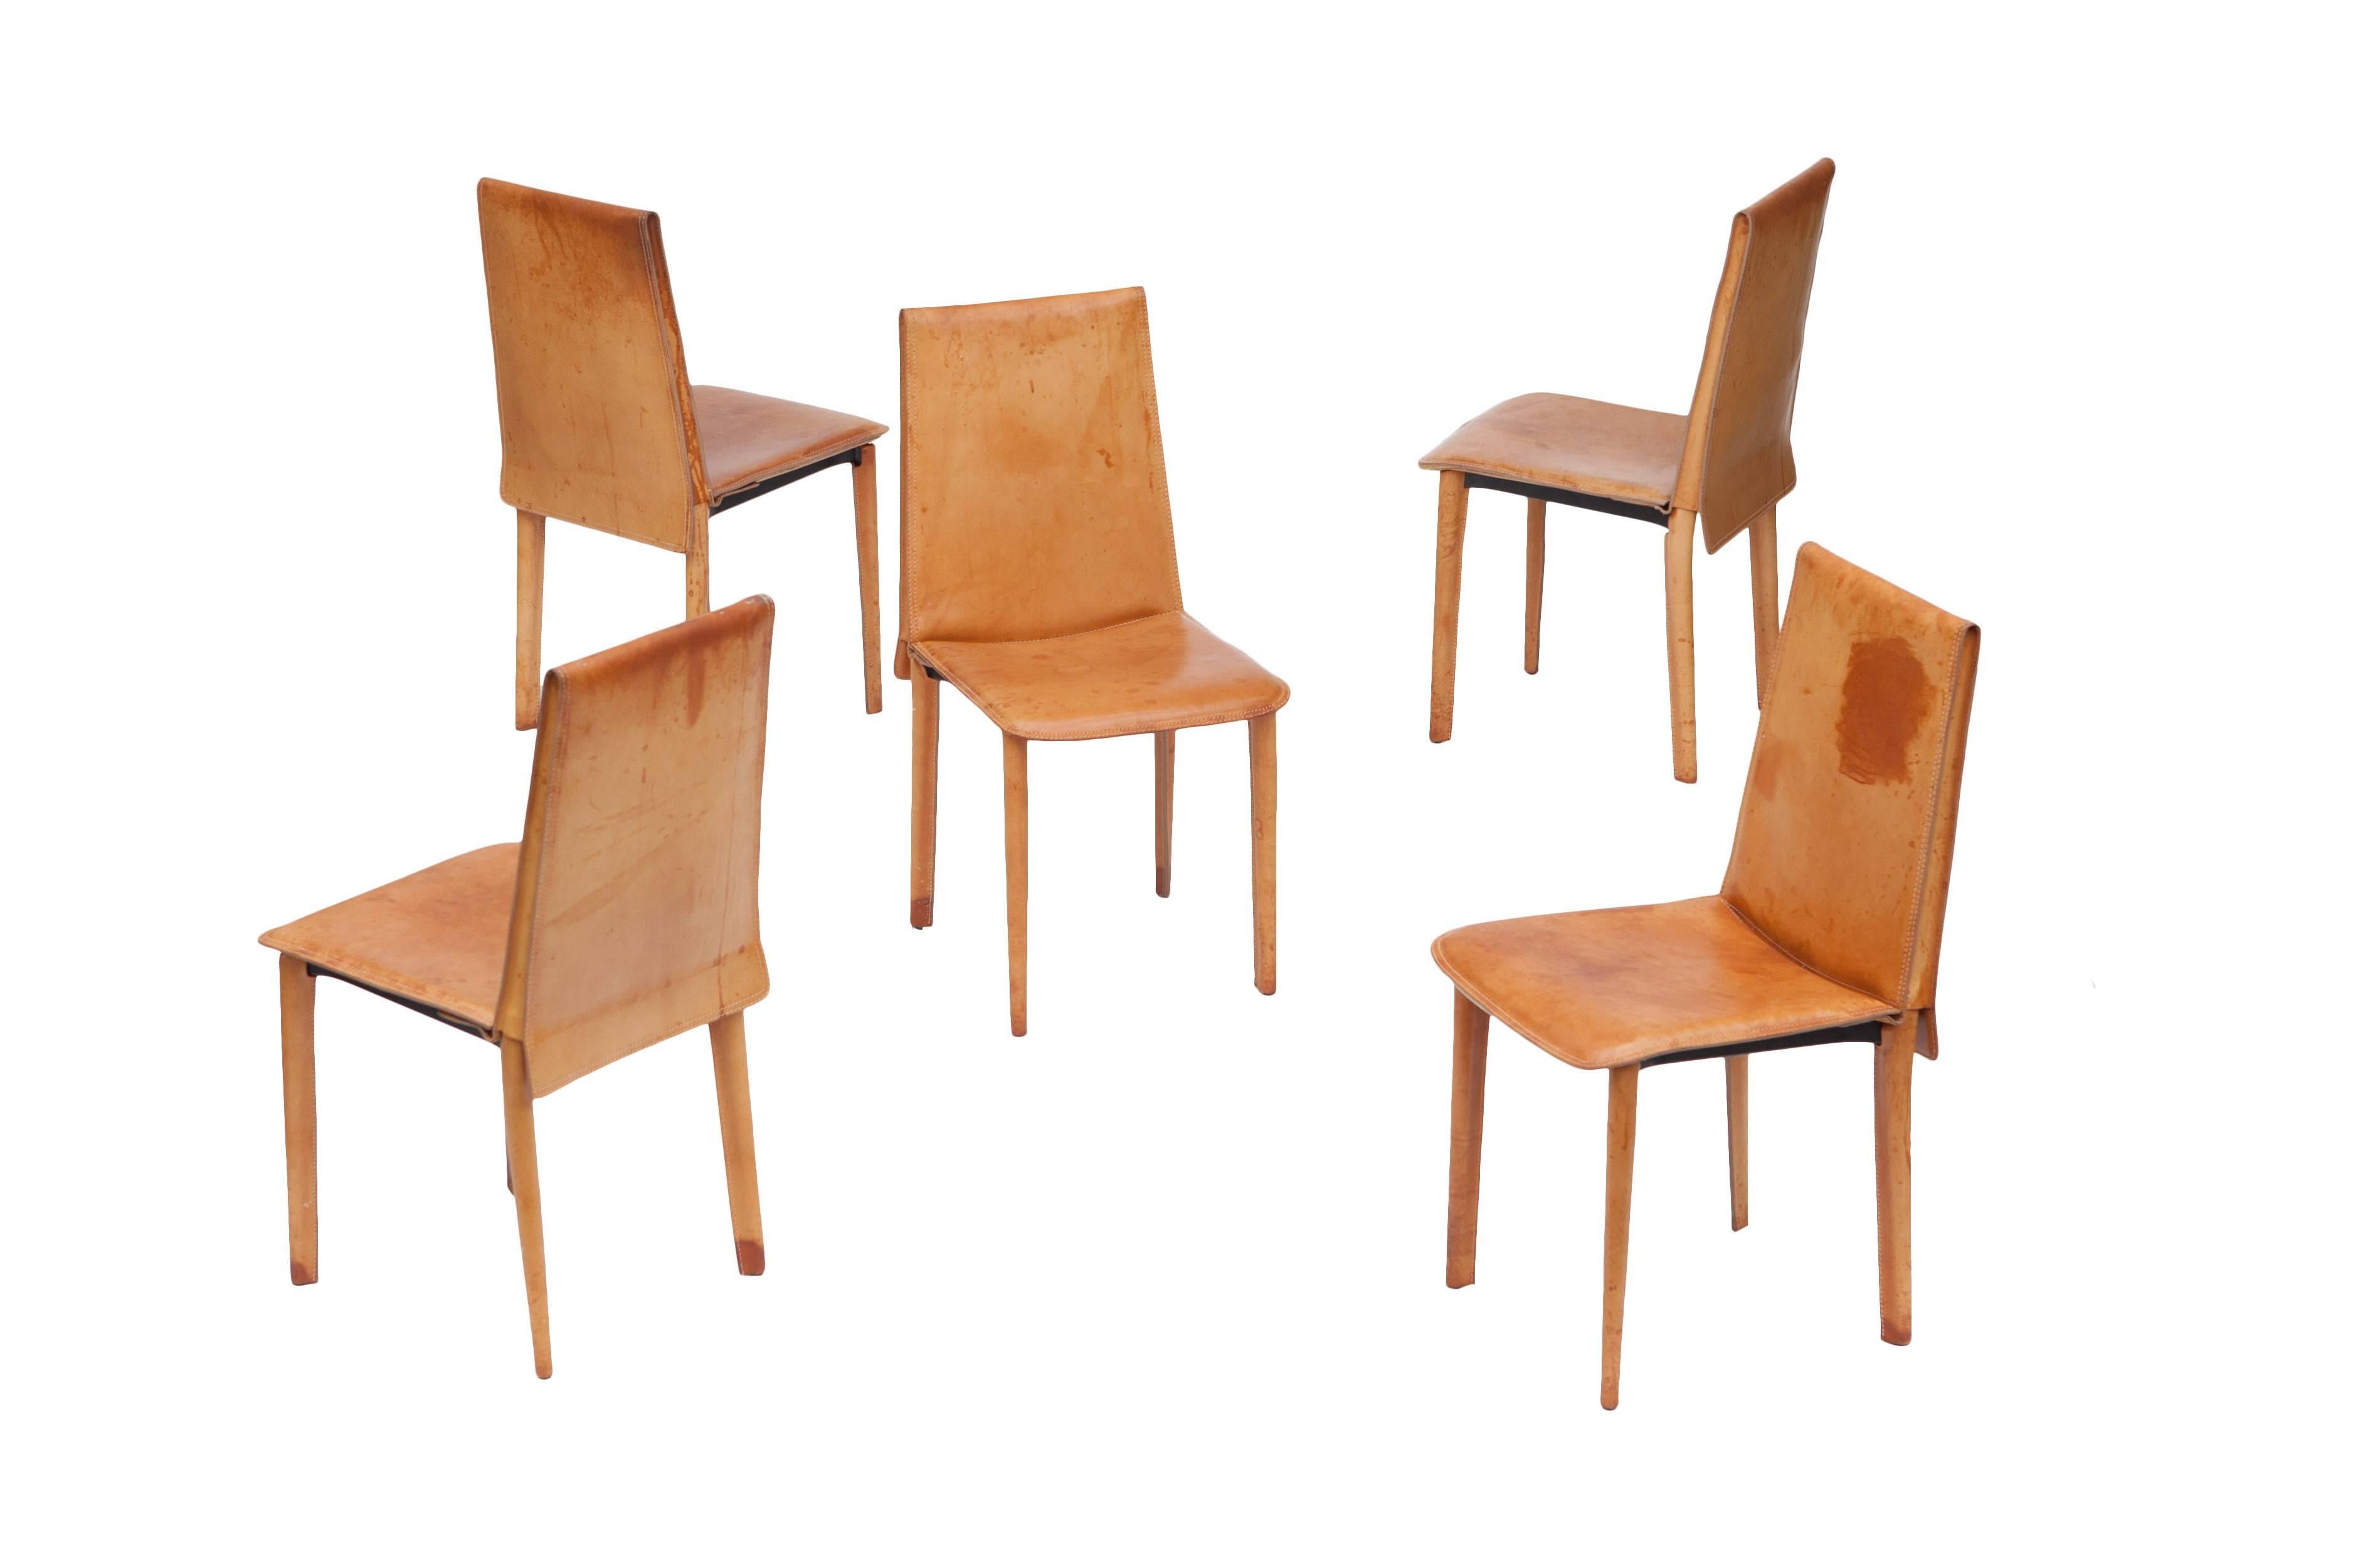 Stunning set of natural leather dining chairs which have Gotten an amazing cognac colored patina with age. Black metal frame fully covered with double stitched leather upholstery.

In the manner of Mario Bellini cab chairs and Matteo